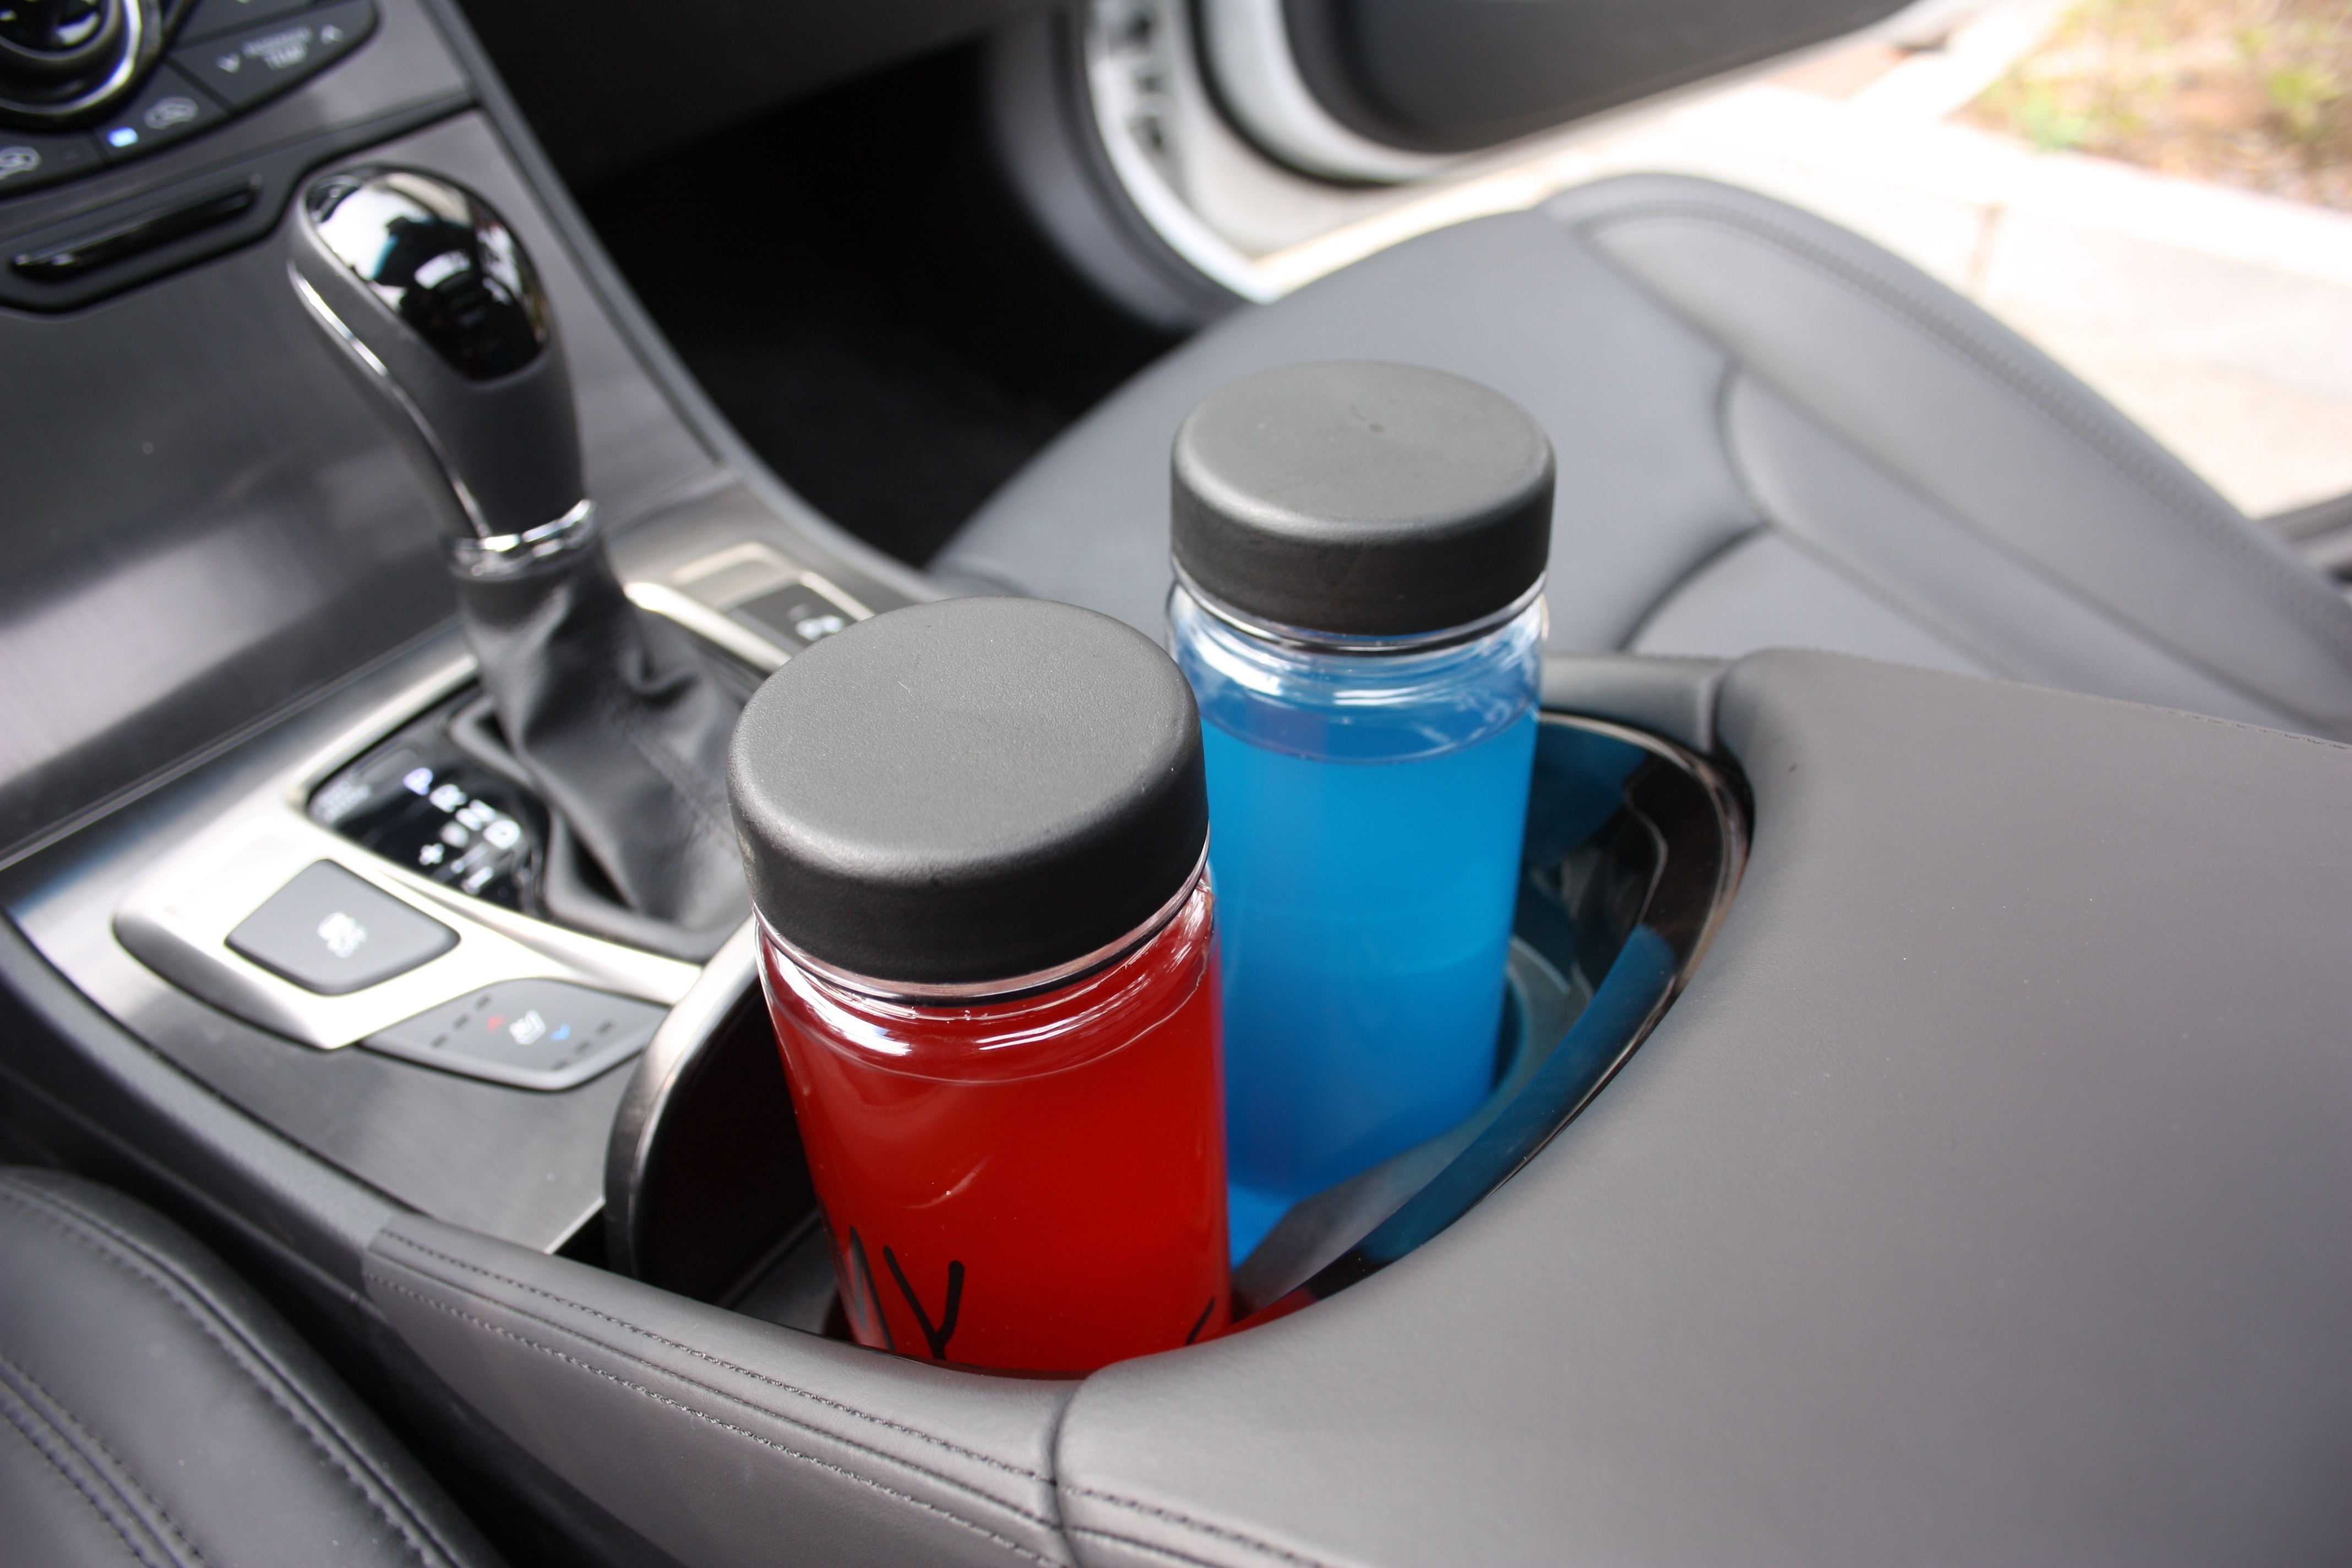 two clear glass with black lids bottles on car near gear shift lever